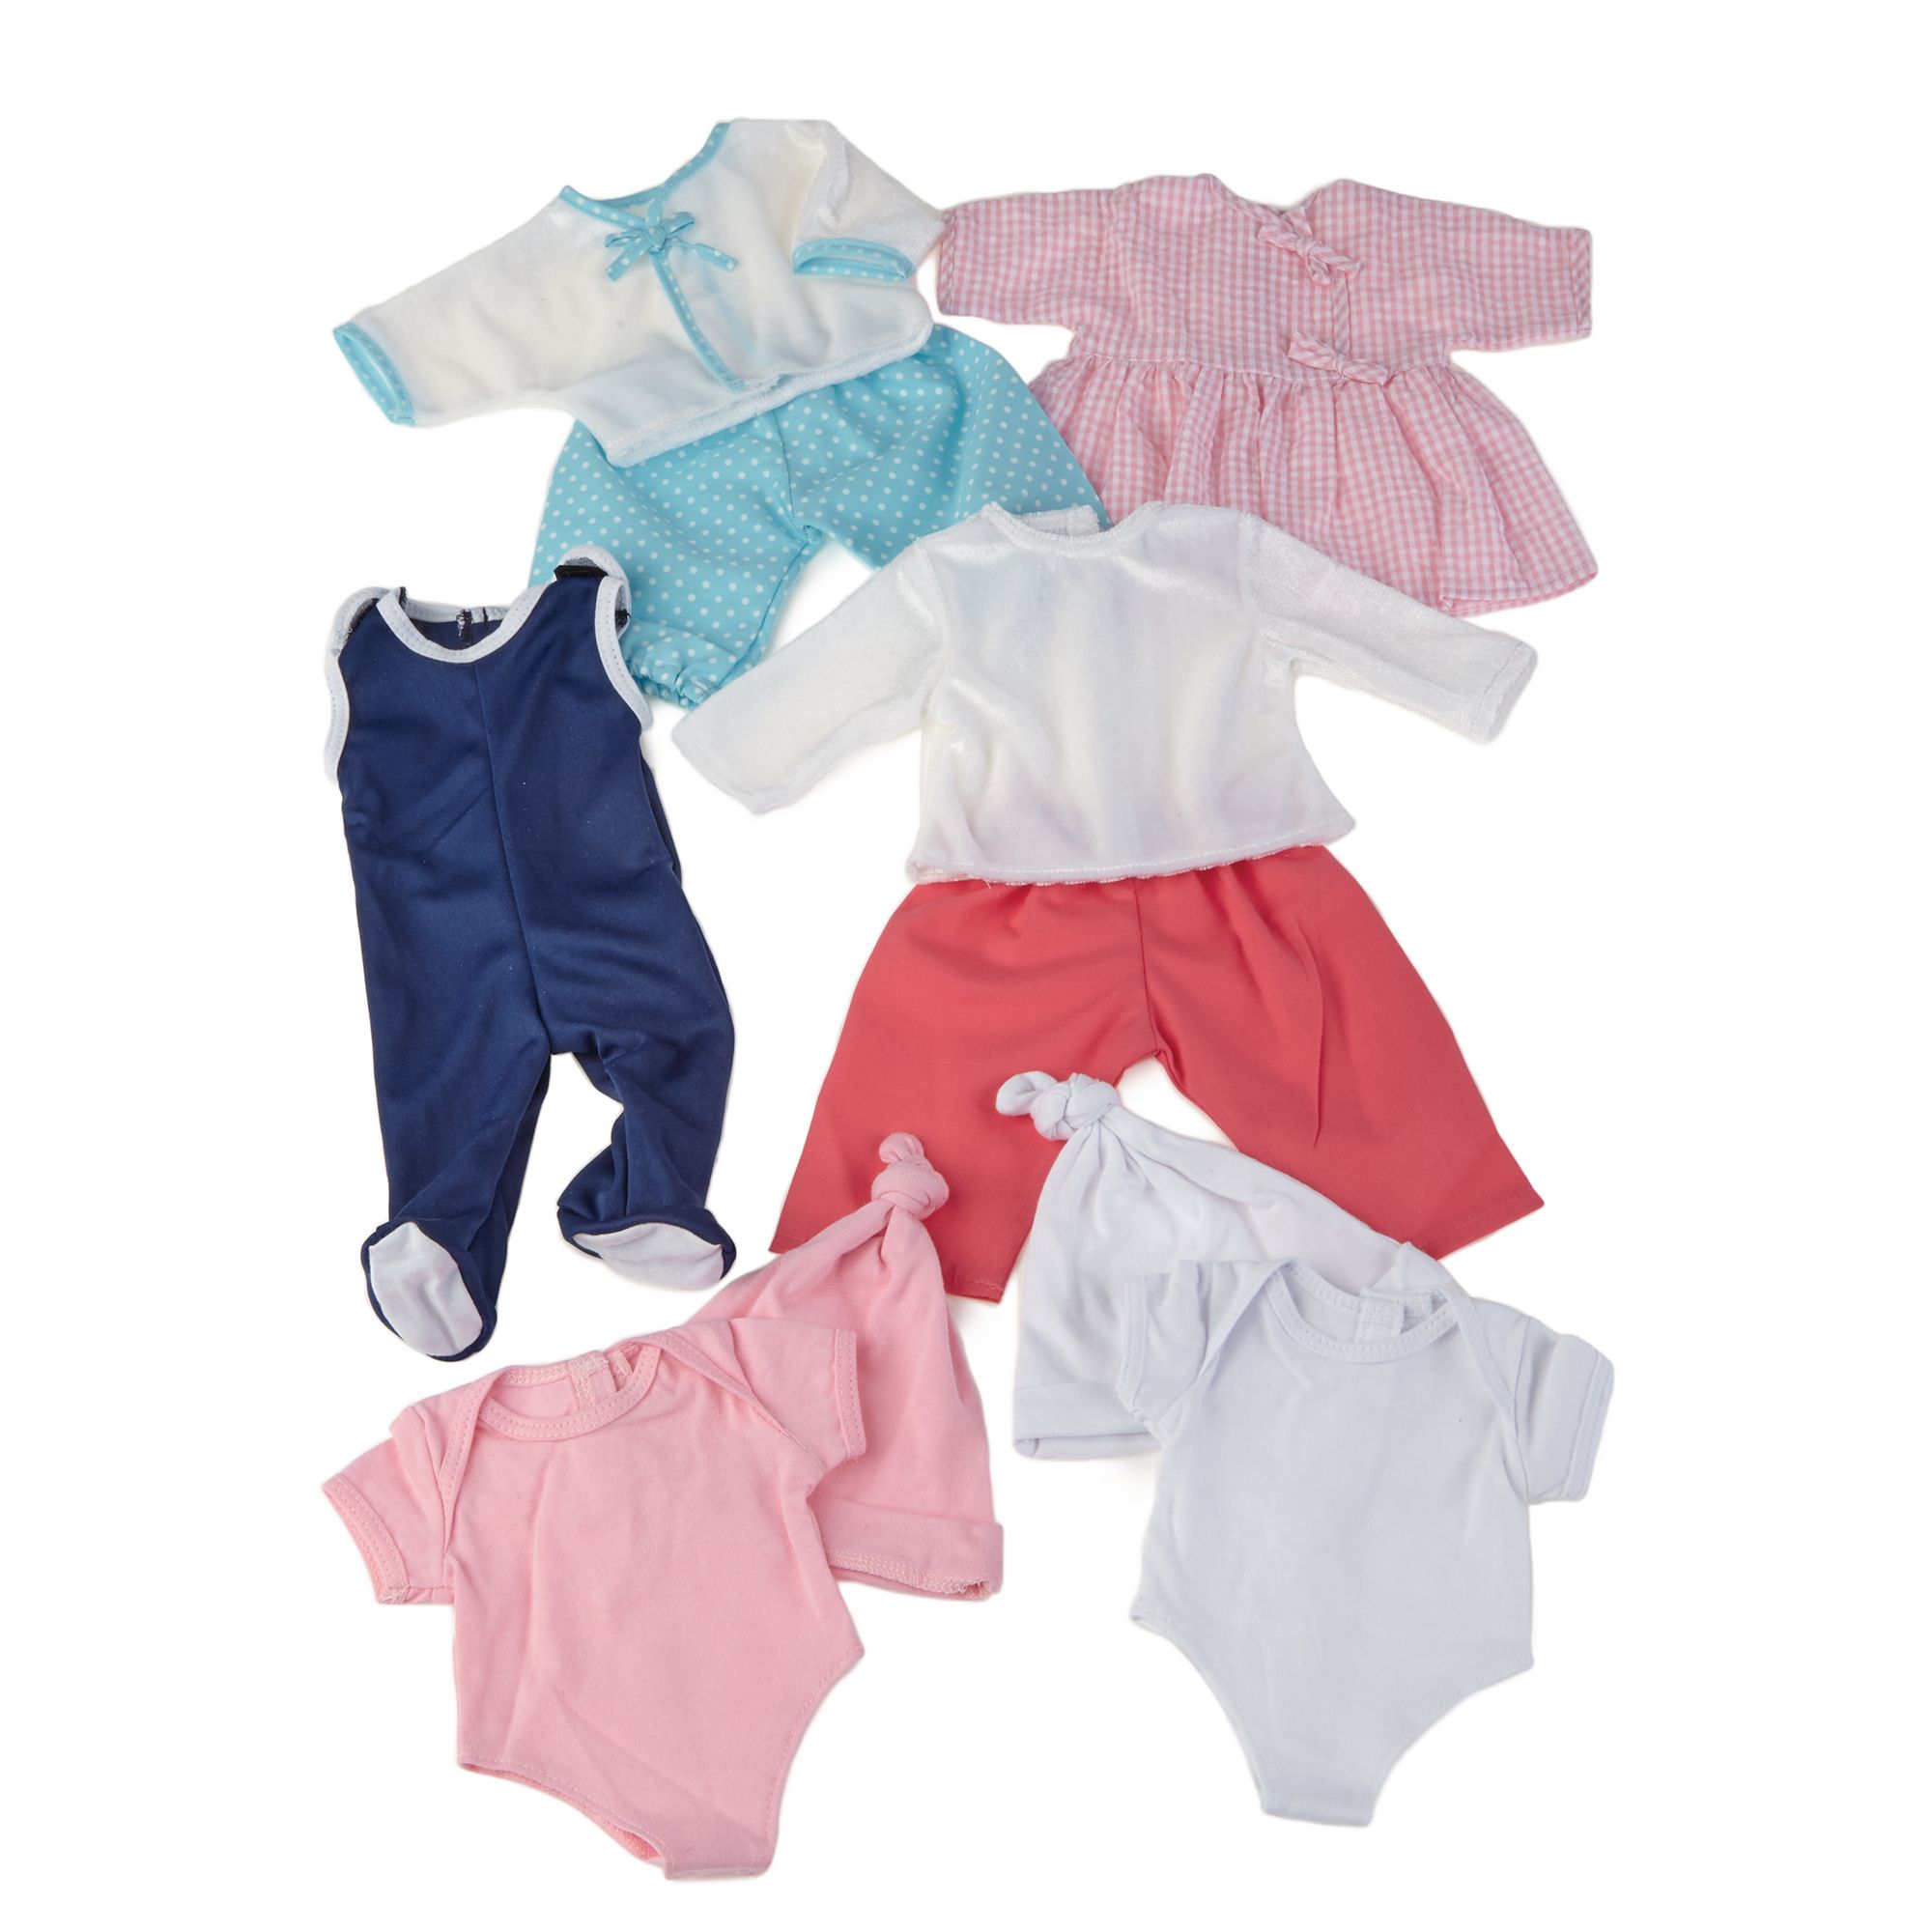 Baby Doll Clothes G1630412 GLS Educational Supplies